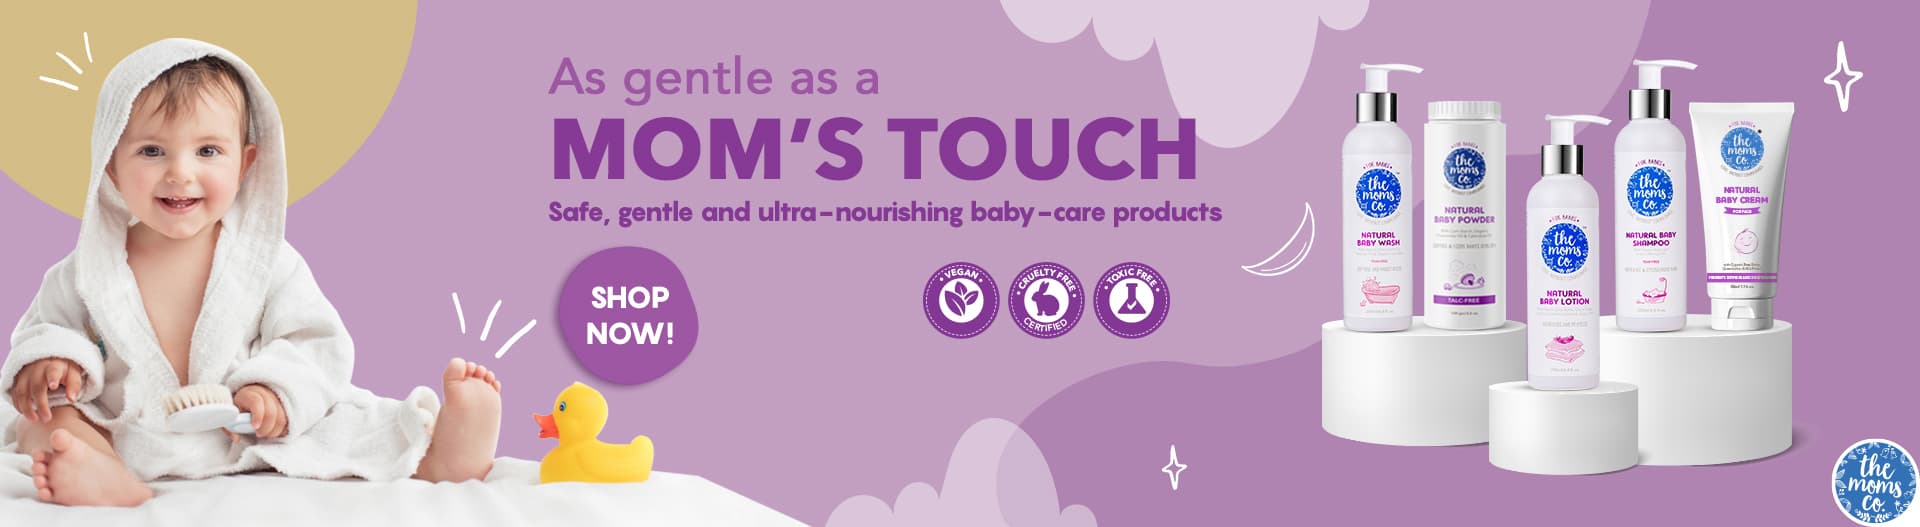 Baby Care - As gentle as moms touch